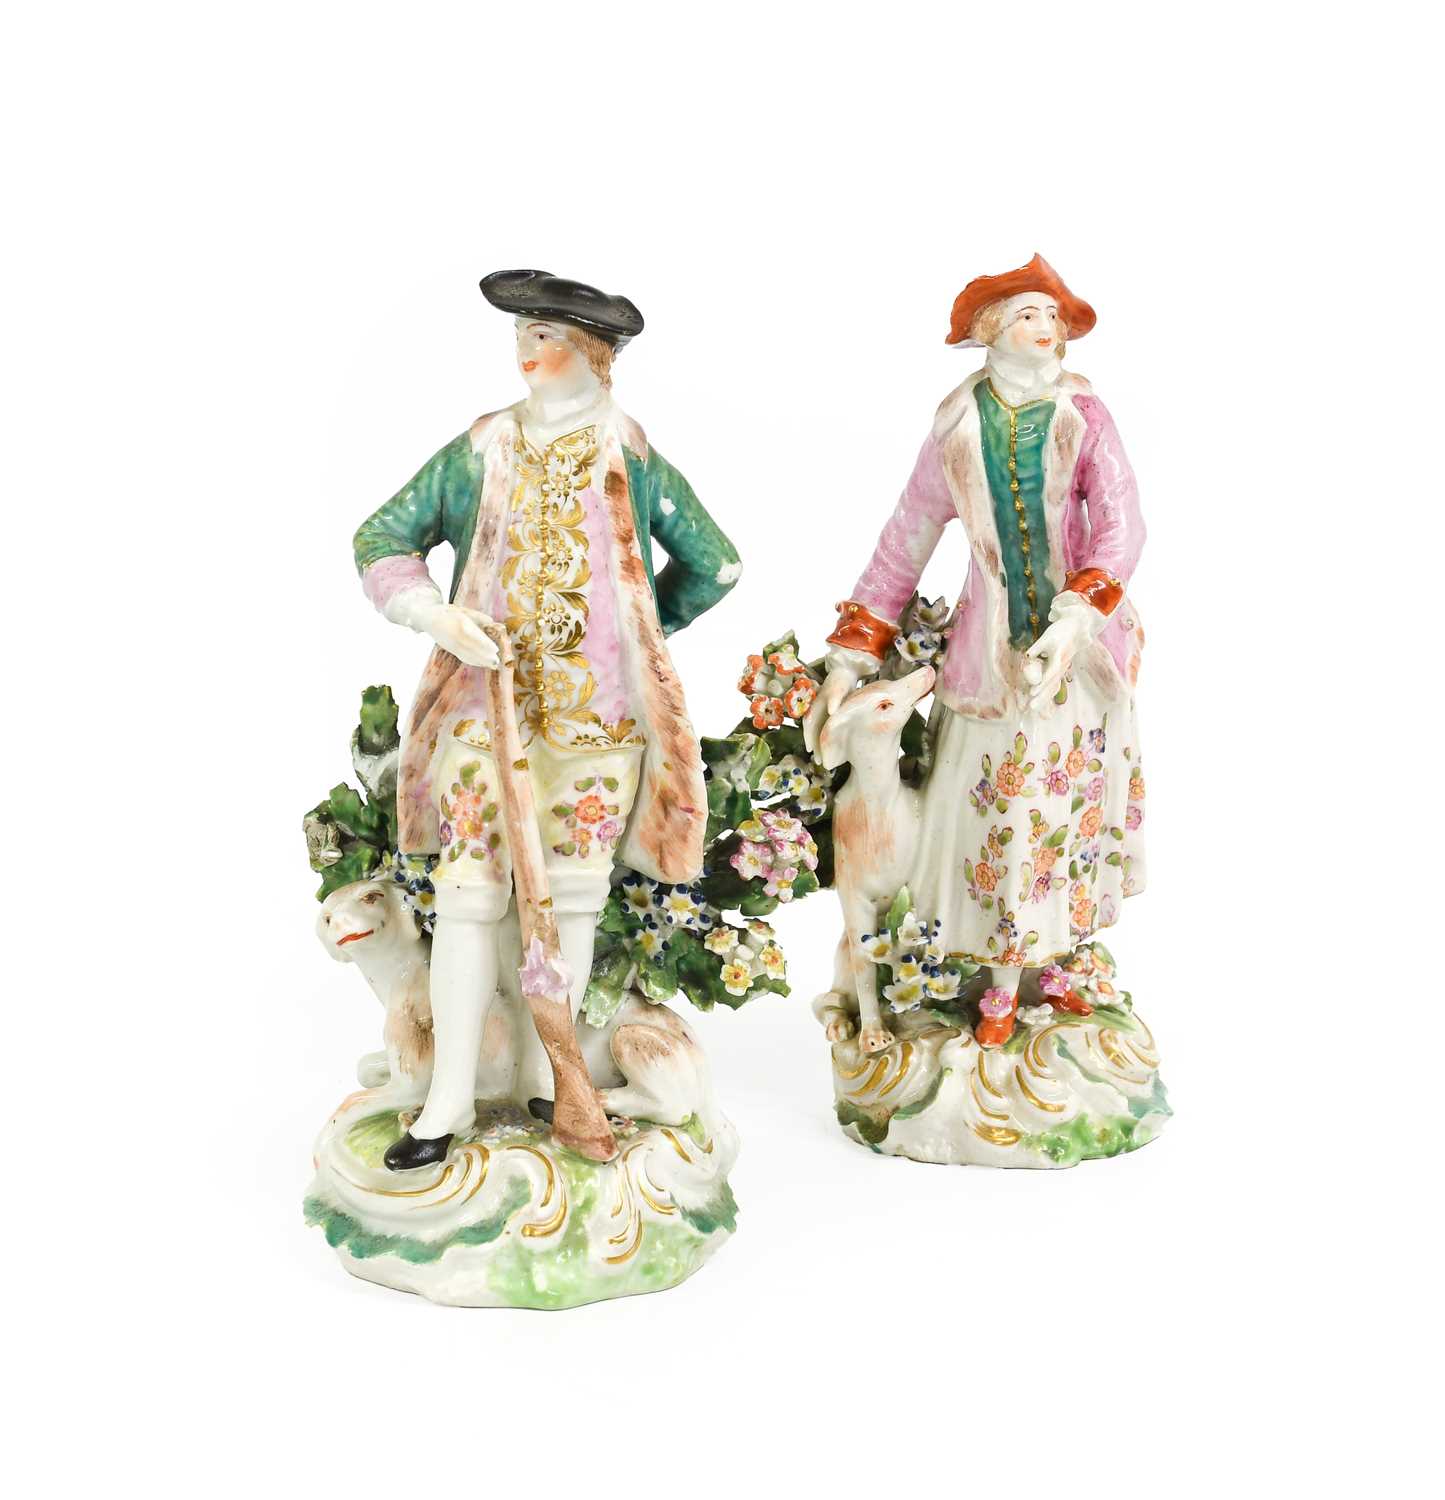 A Near Pair of Derby Porcelain Figures, circa 1770, modelled as a sportsman and his companion, stood